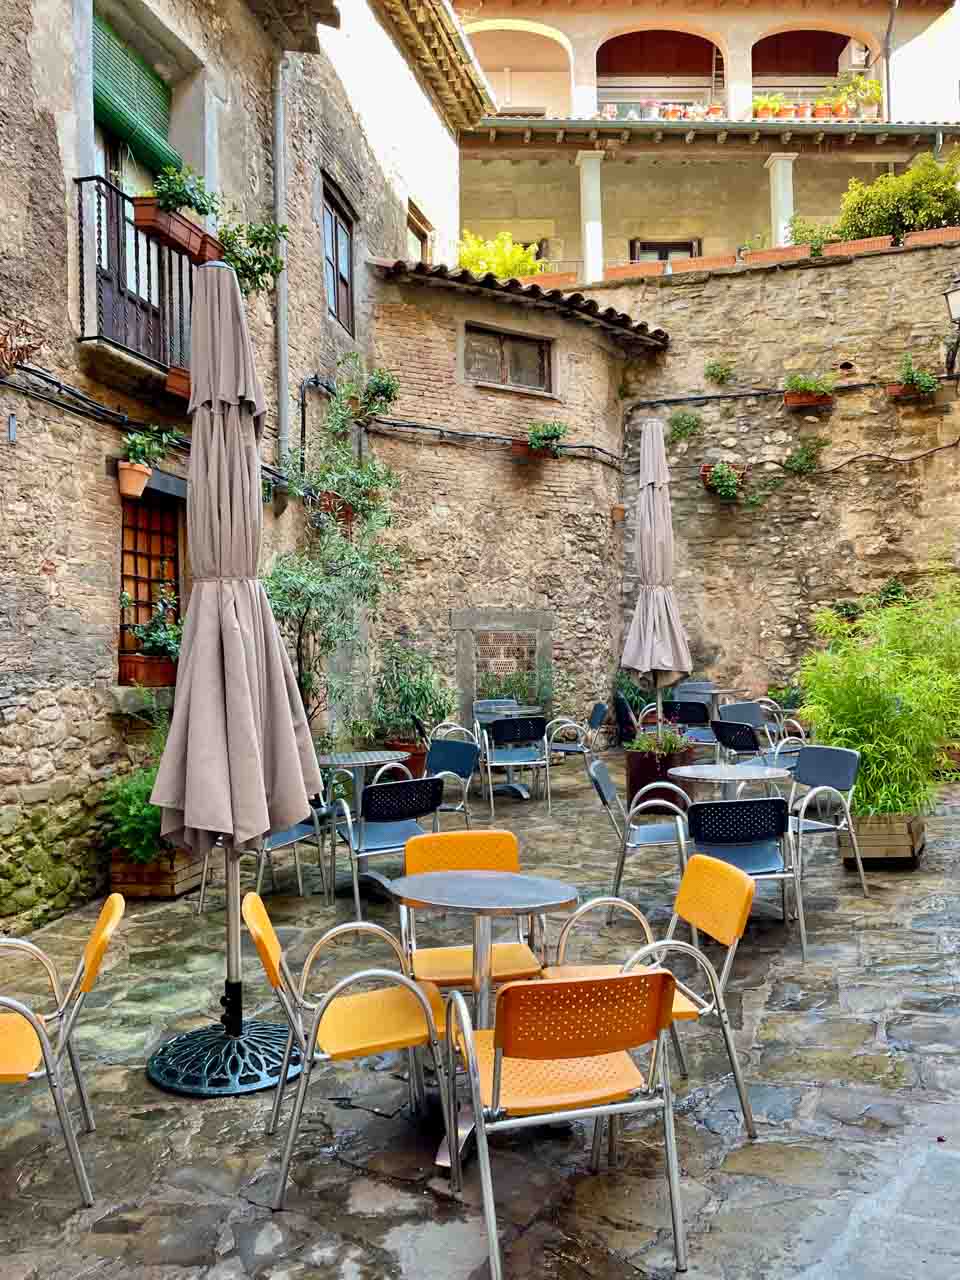 Cafe tables and chairs and umbrellas are set up in a small square in fromt of stone buildings.